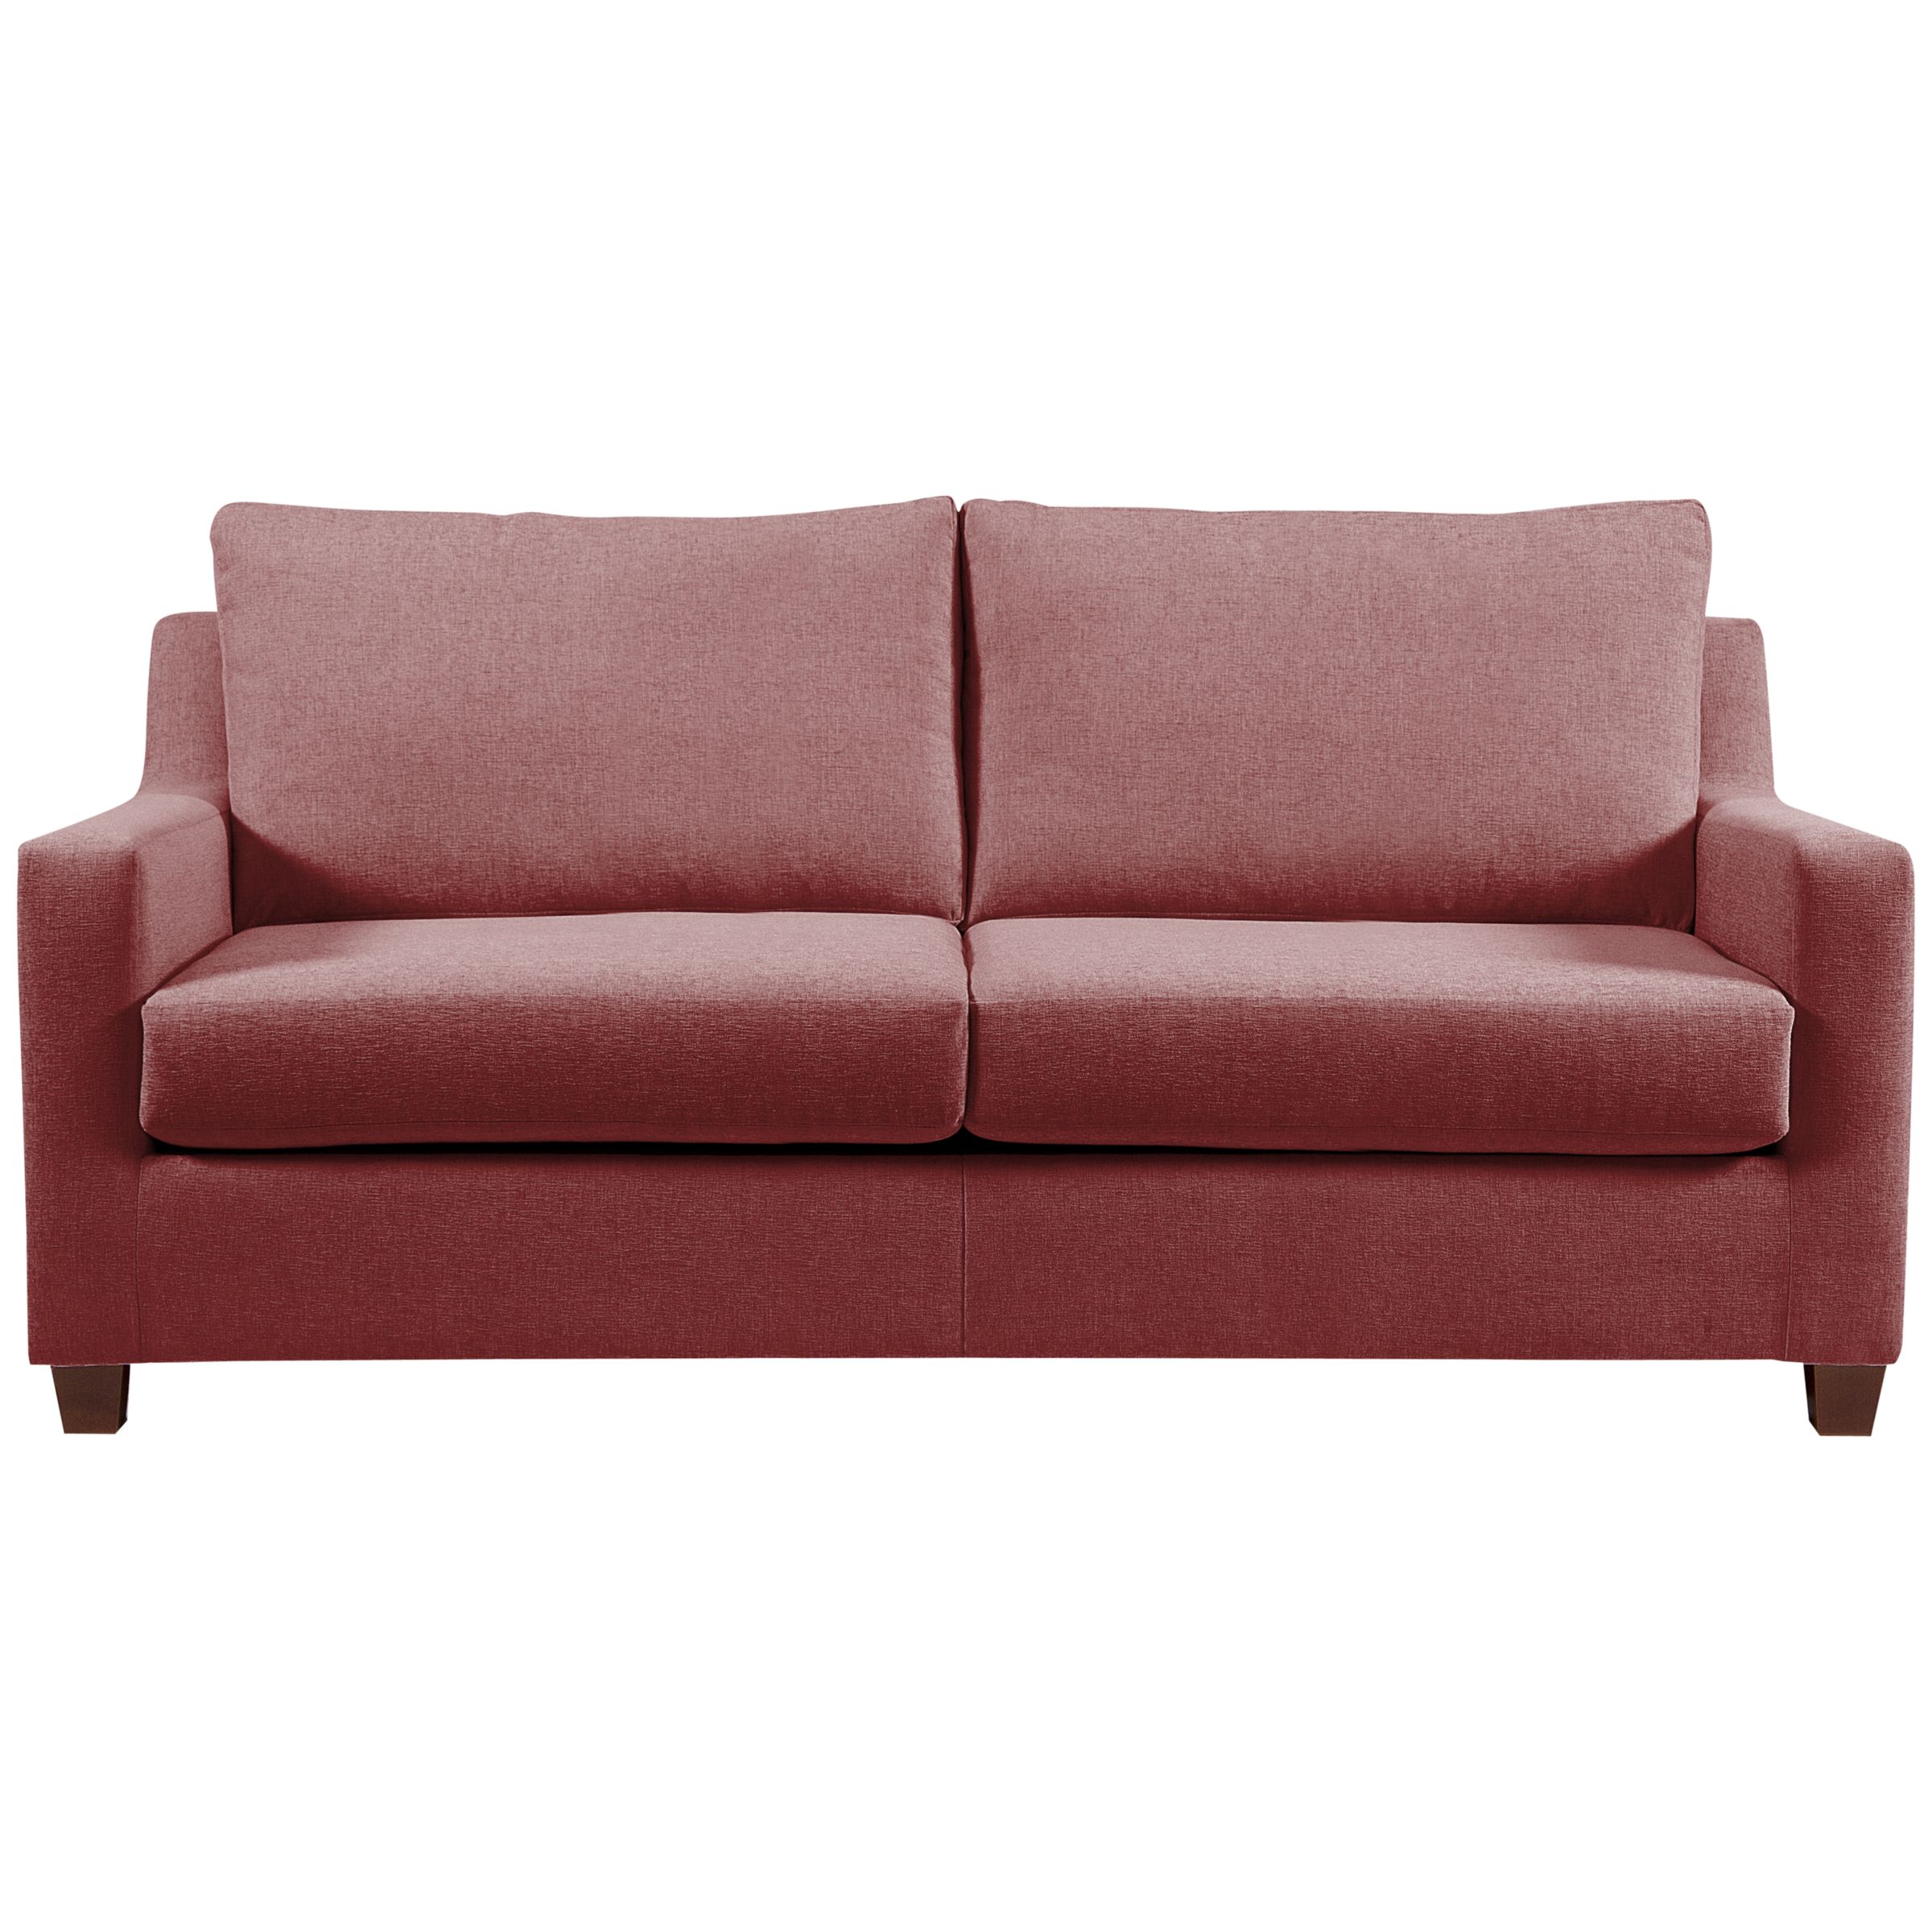 John Lewis Bizet Large Sofa Bed with Open Sprung Mattress, Red, width 208cm